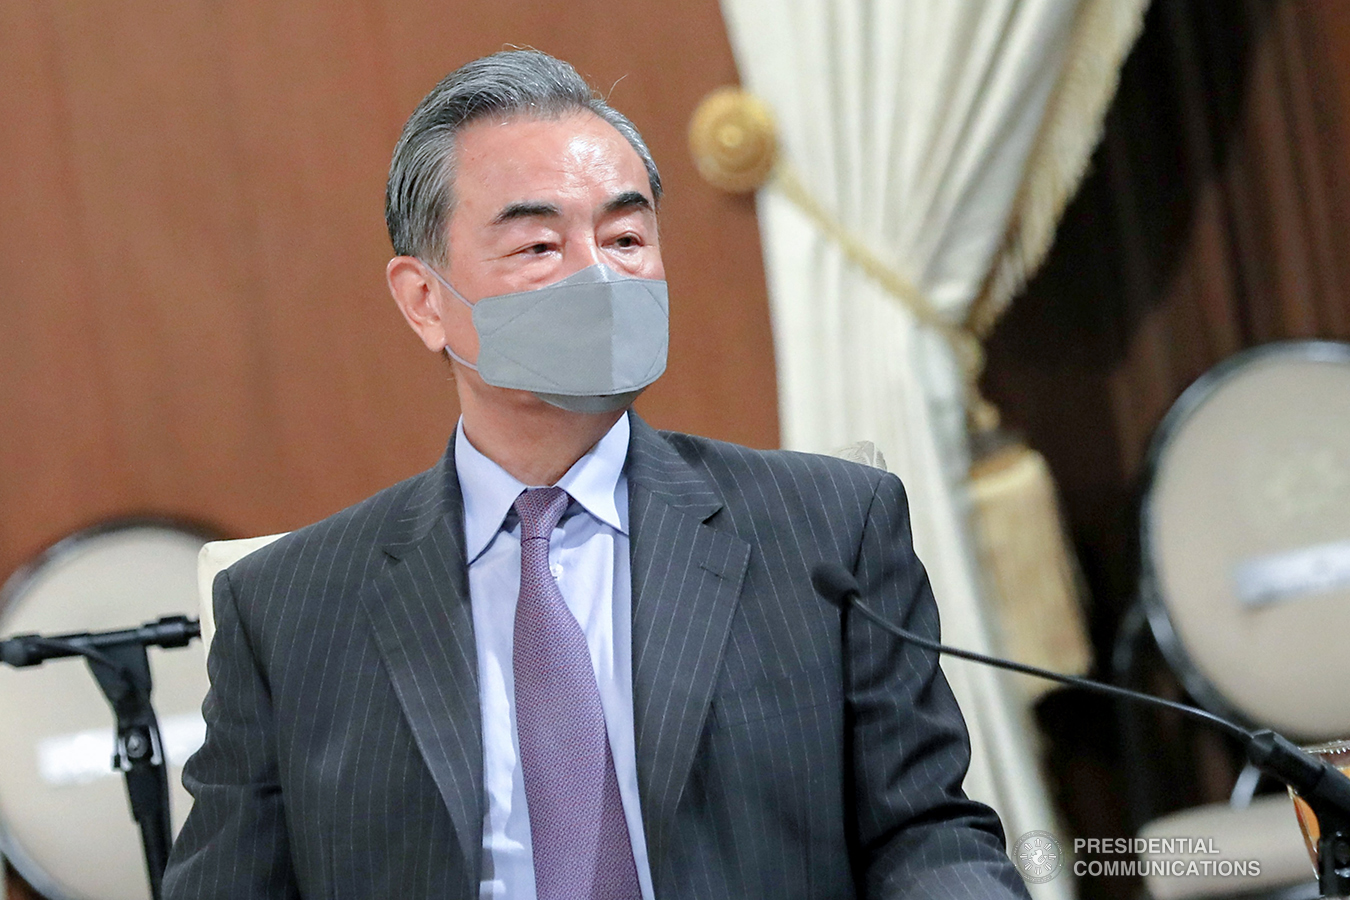 People's Republic of China State Councilor and Foreign Minister Wang Yi